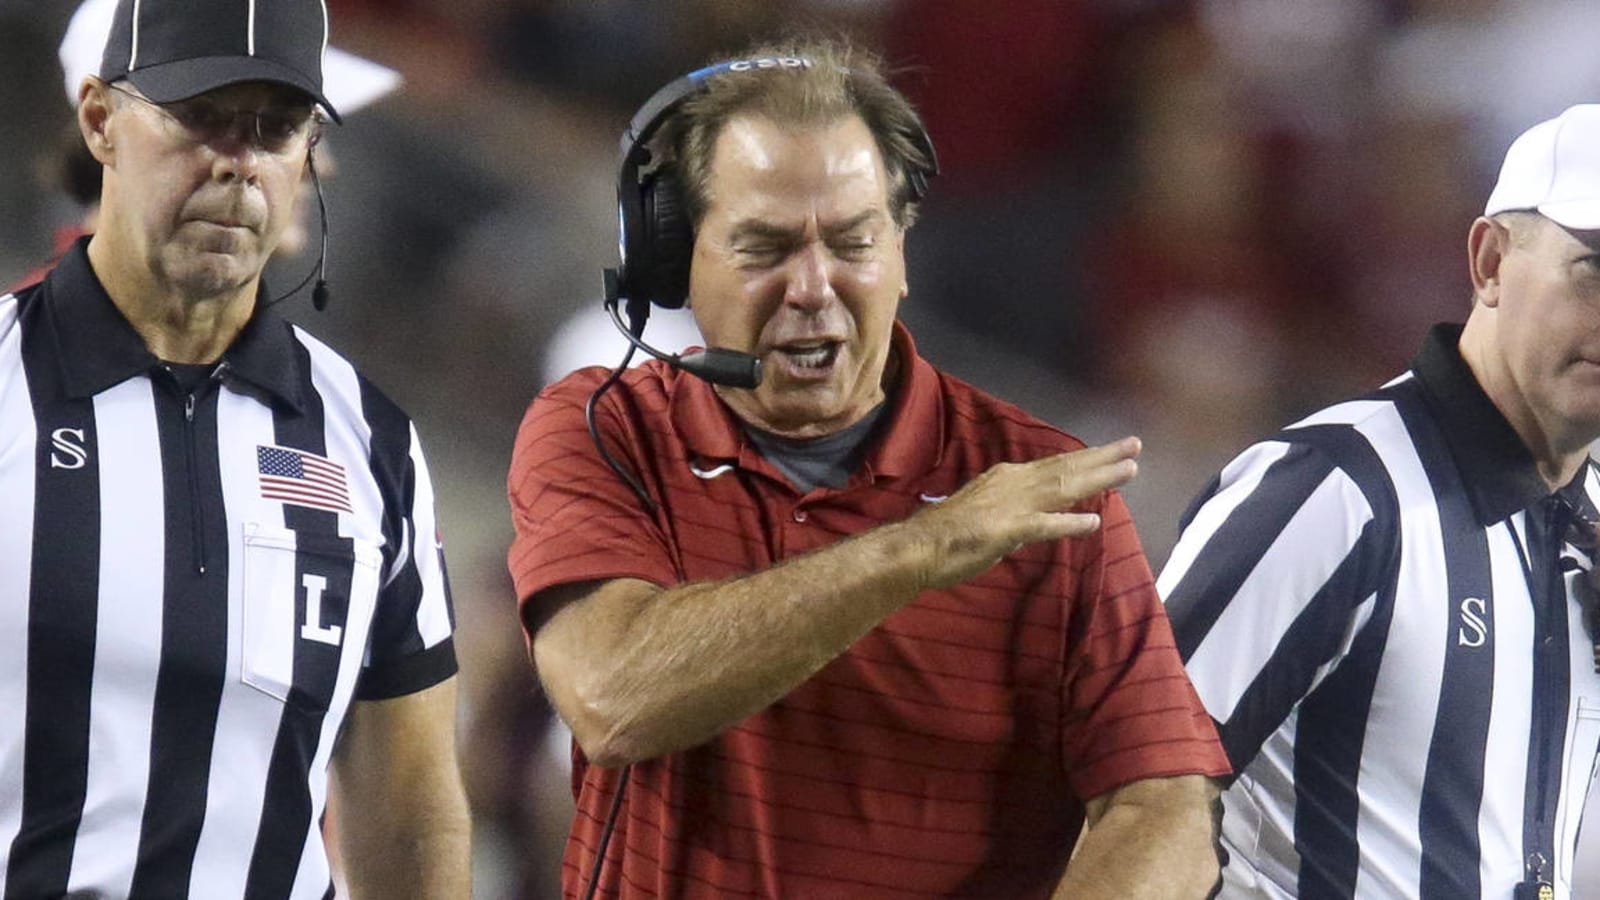 Saban shows off bruise from Texas A&M fans rushing field